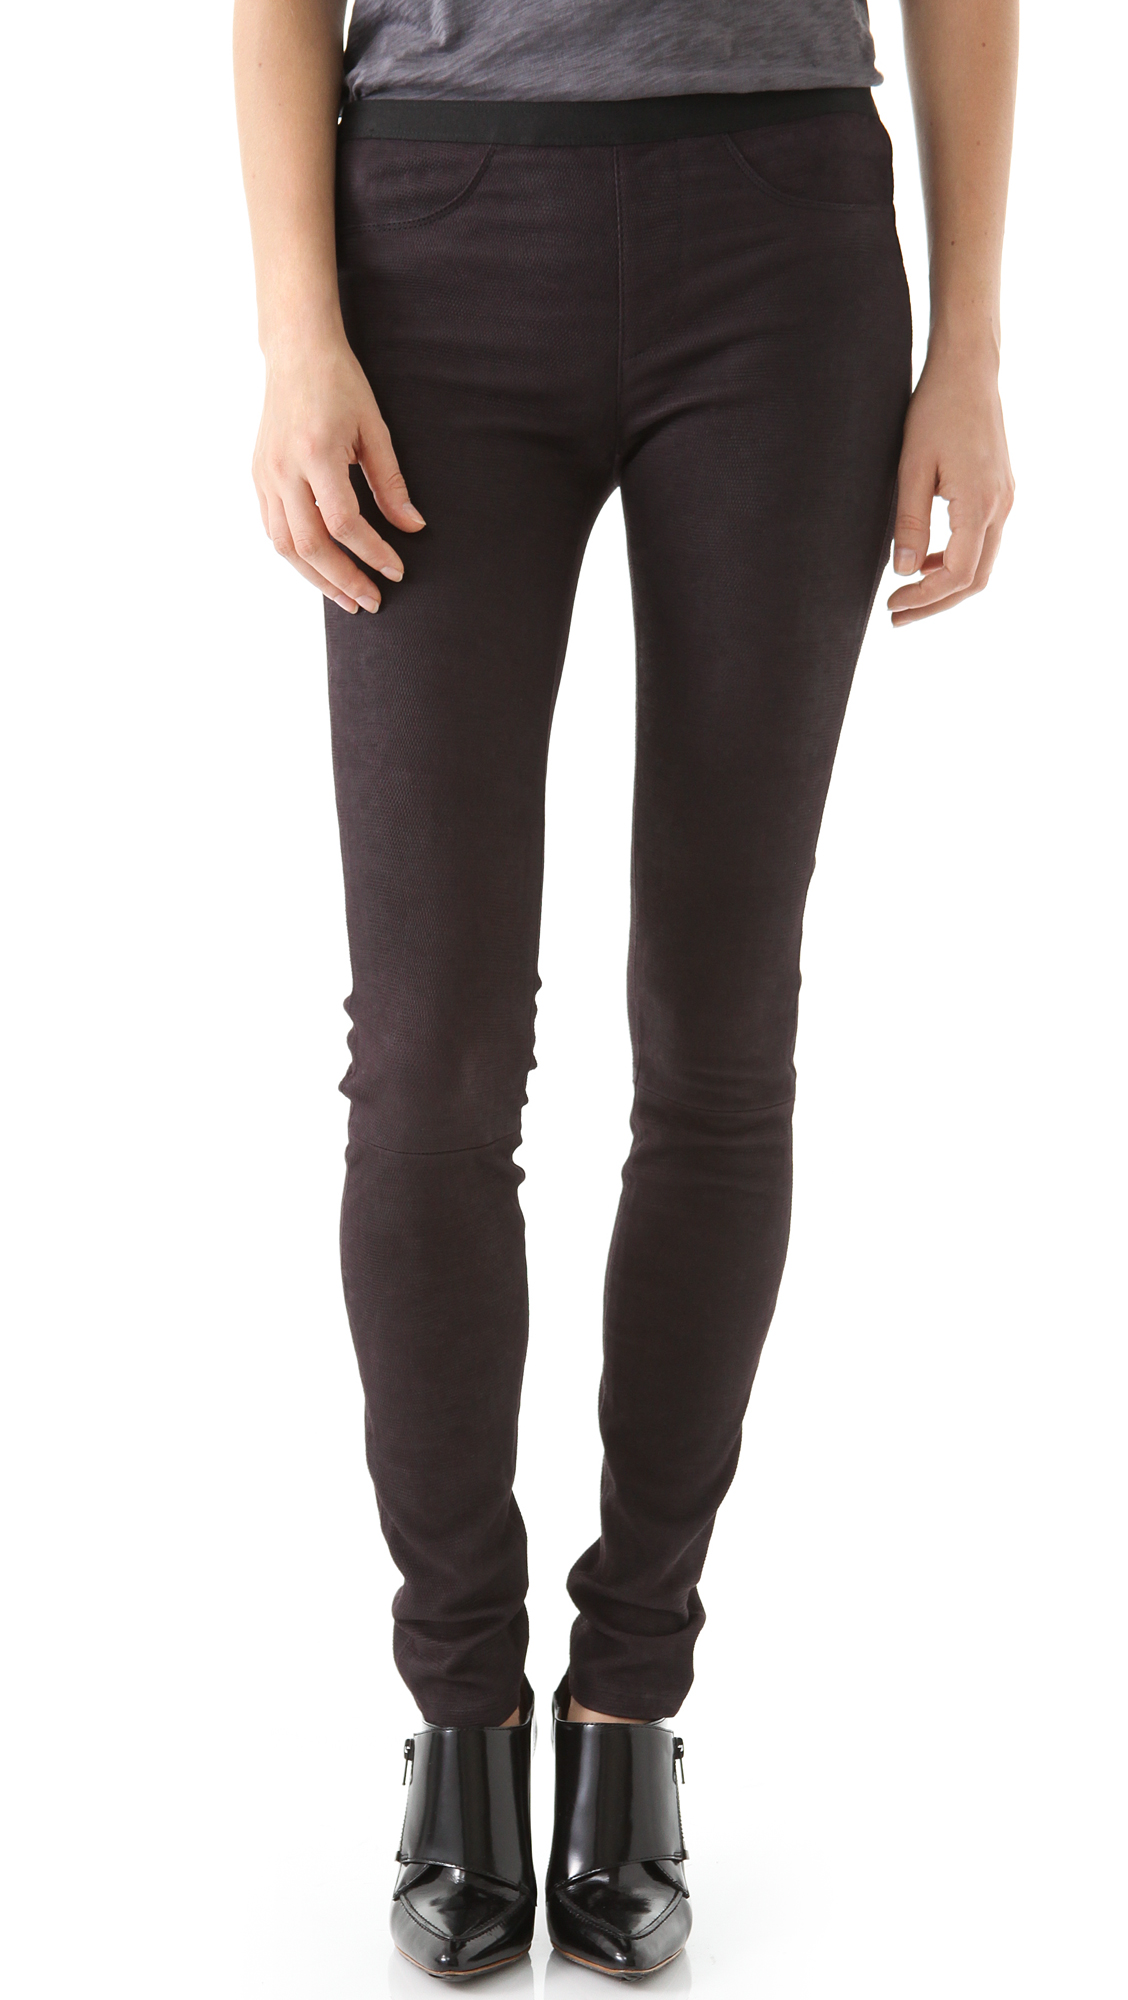 Helmut Lang Embossed Stretch Leather Leggings in Purple - Lyst